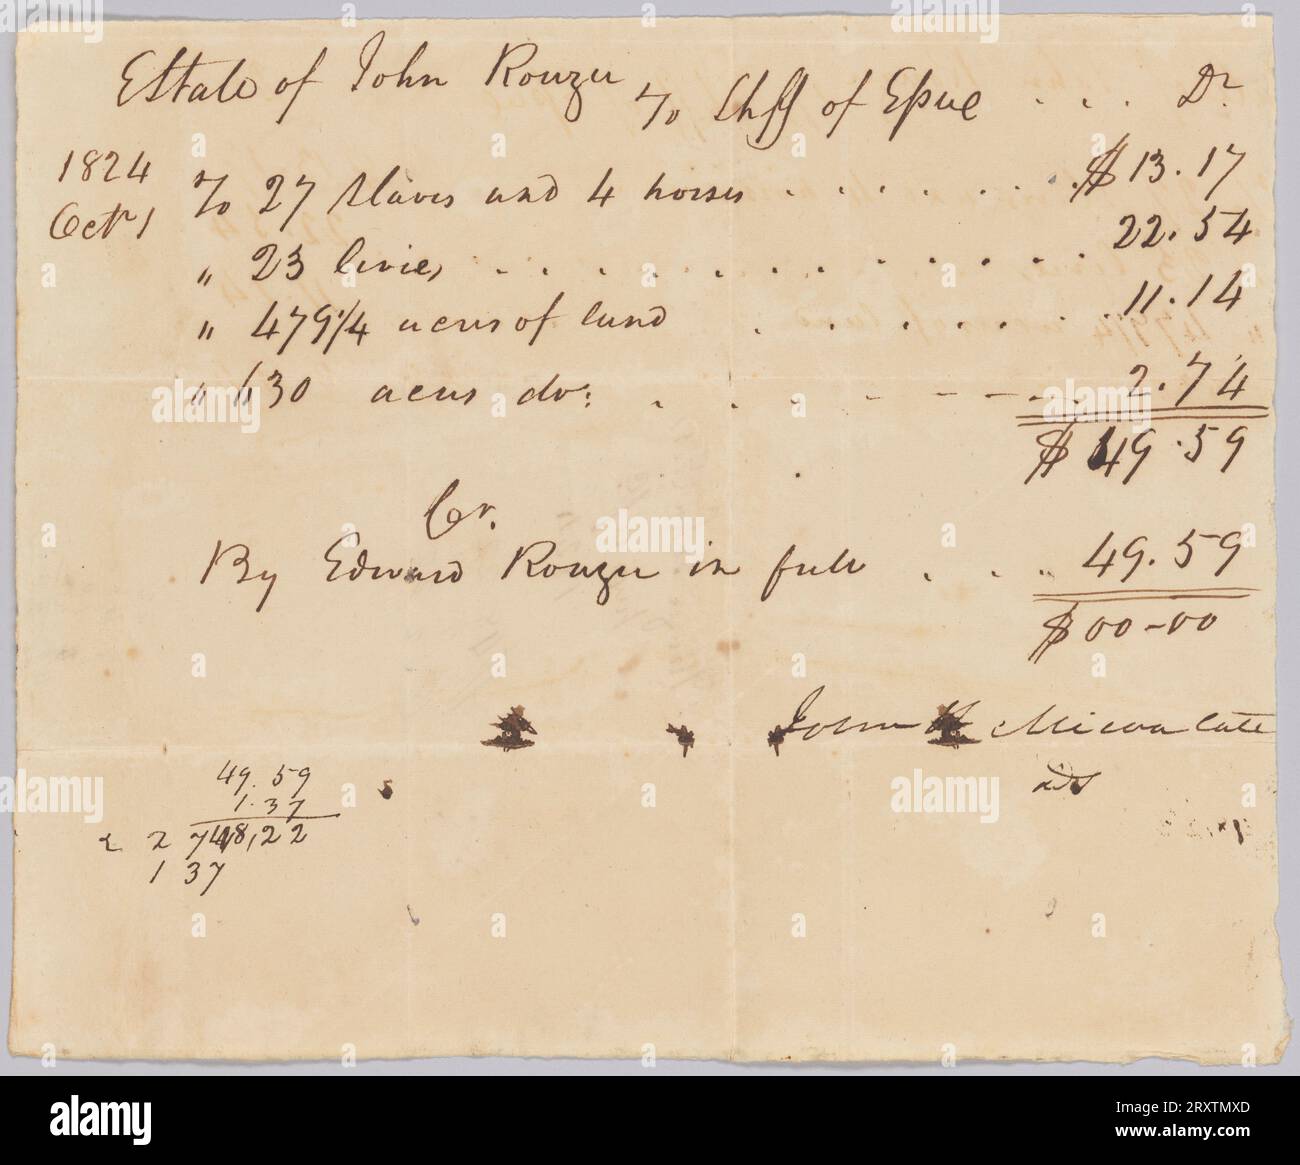 Record of taxes on property, including enslaved persons, owned by John Rouzee 1824 Stock Photo